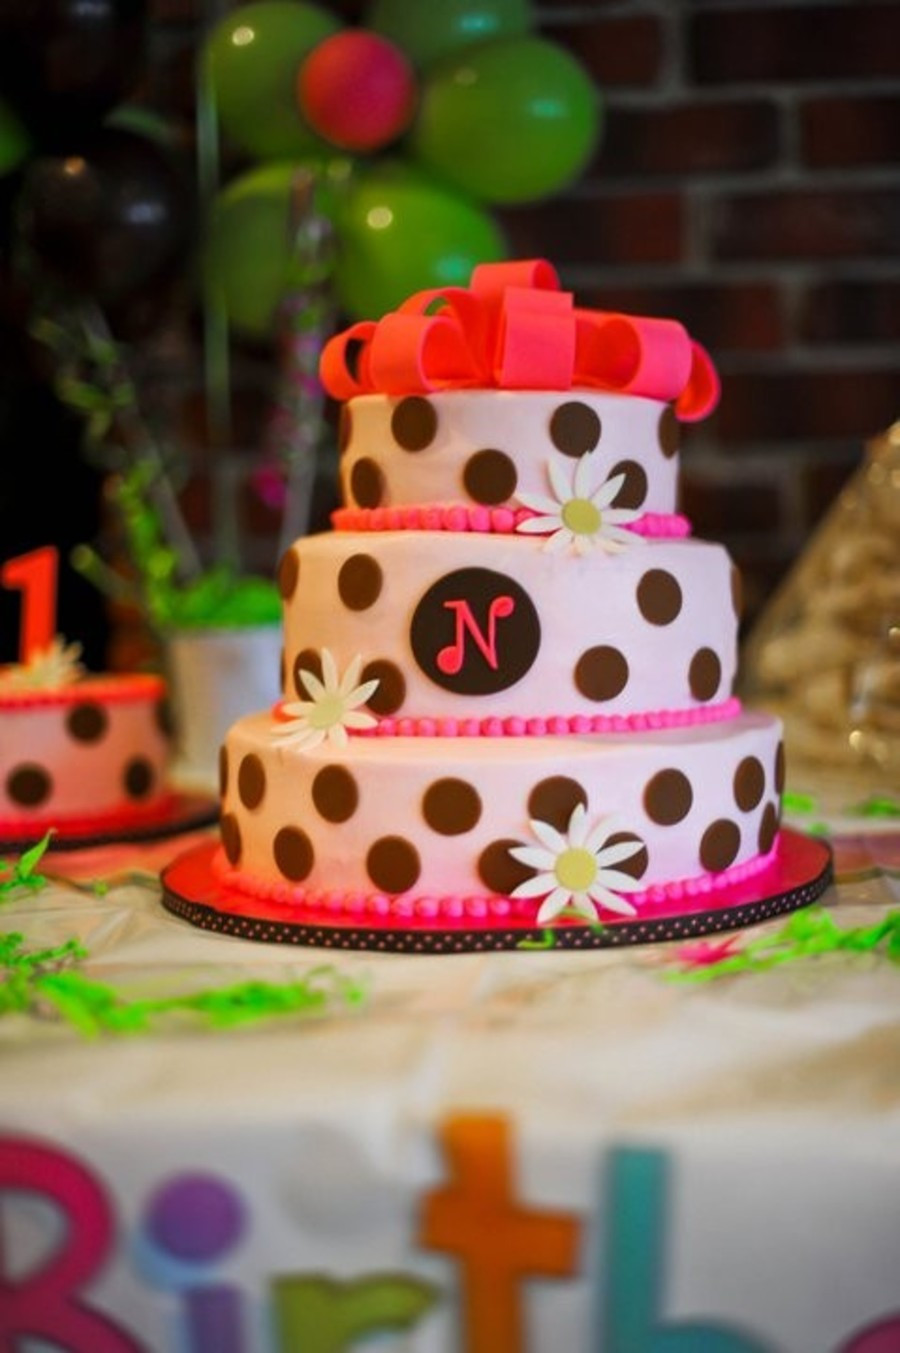 Polka Dot Birthday Cake
 Polka Dot Birthday Cake CakeCentral